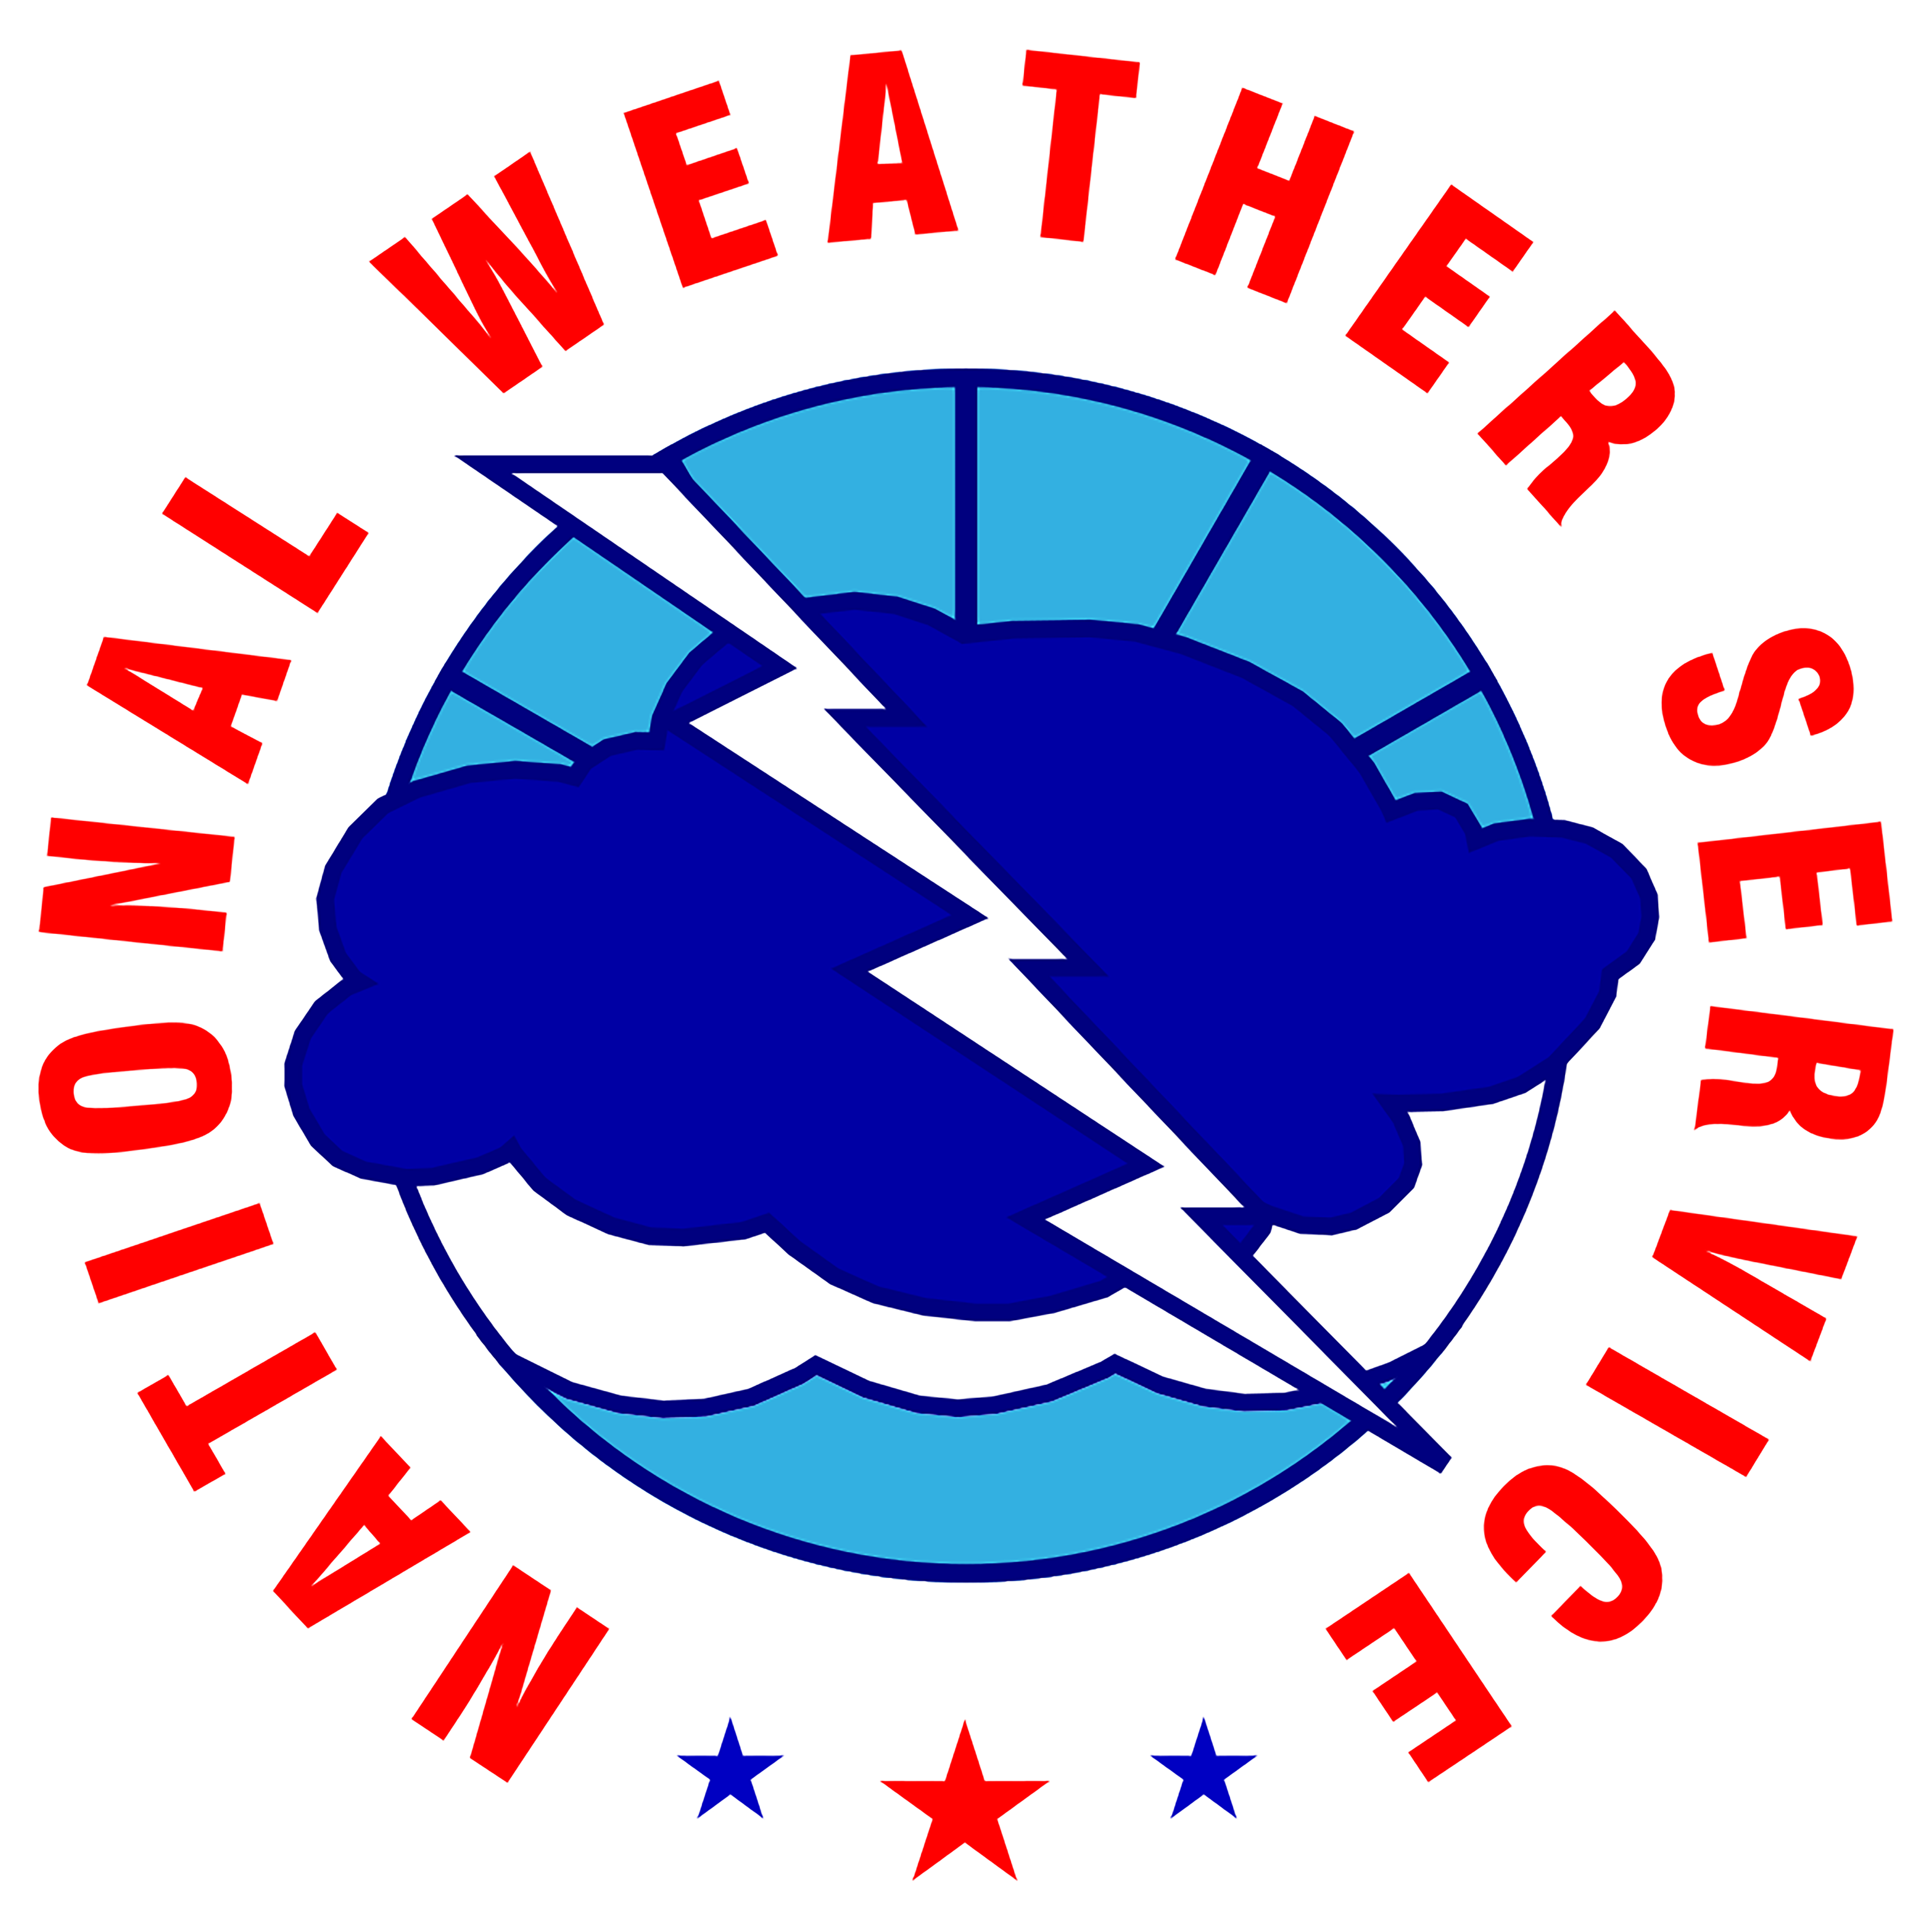 Data provided by NWS.